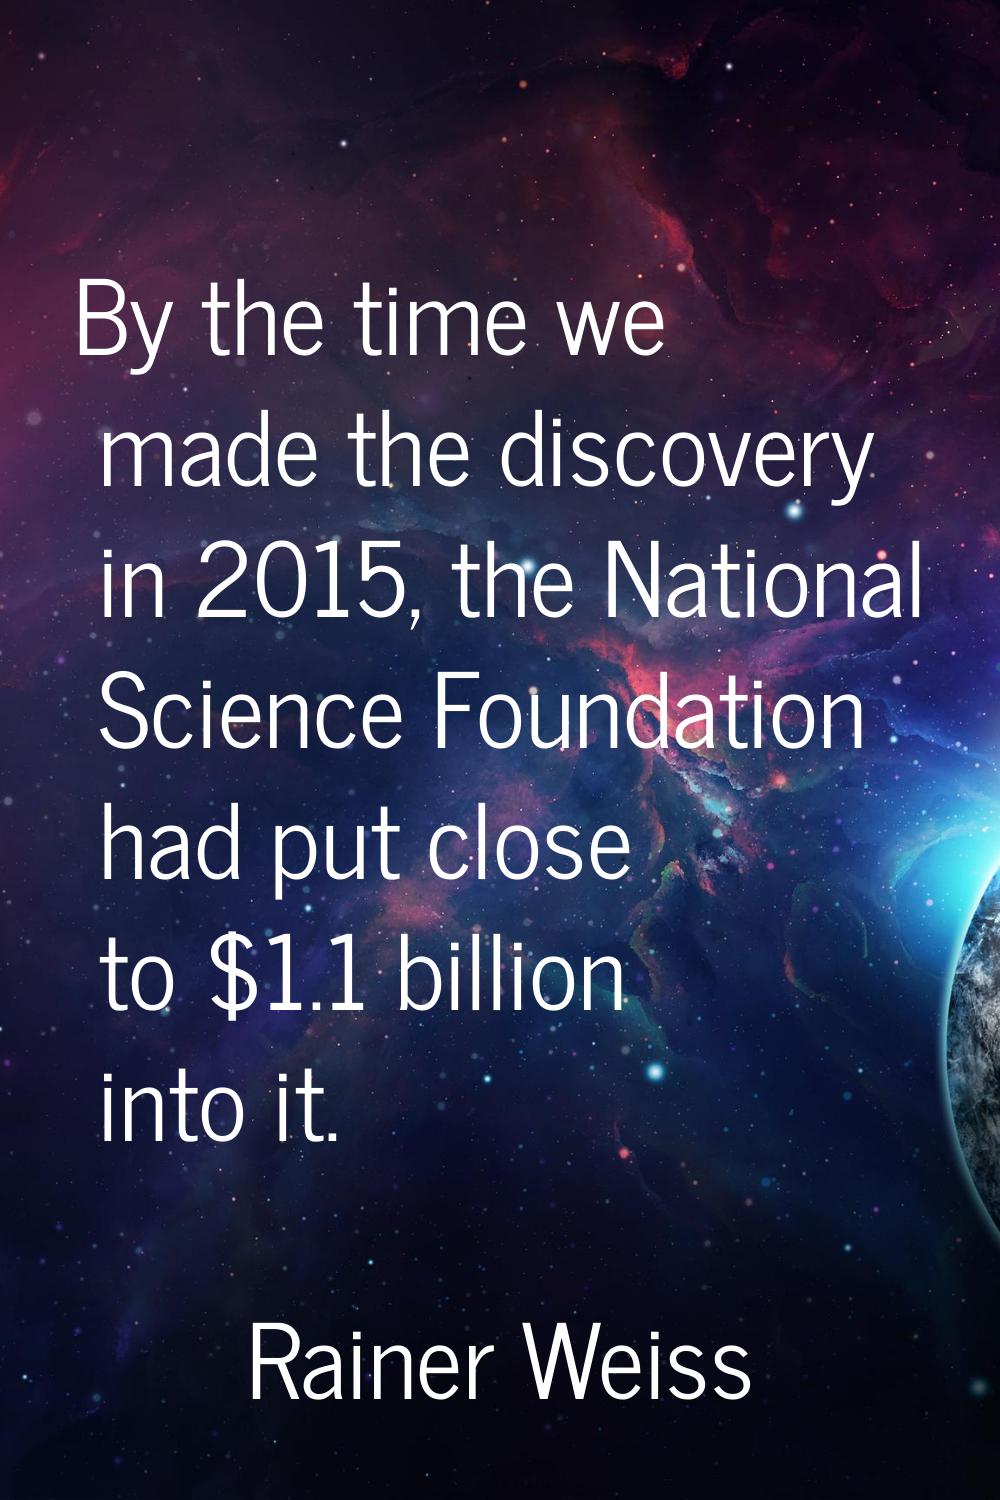 By the time we made the discovery in 2015, the National Science Foundation had put close to $1.1 bi